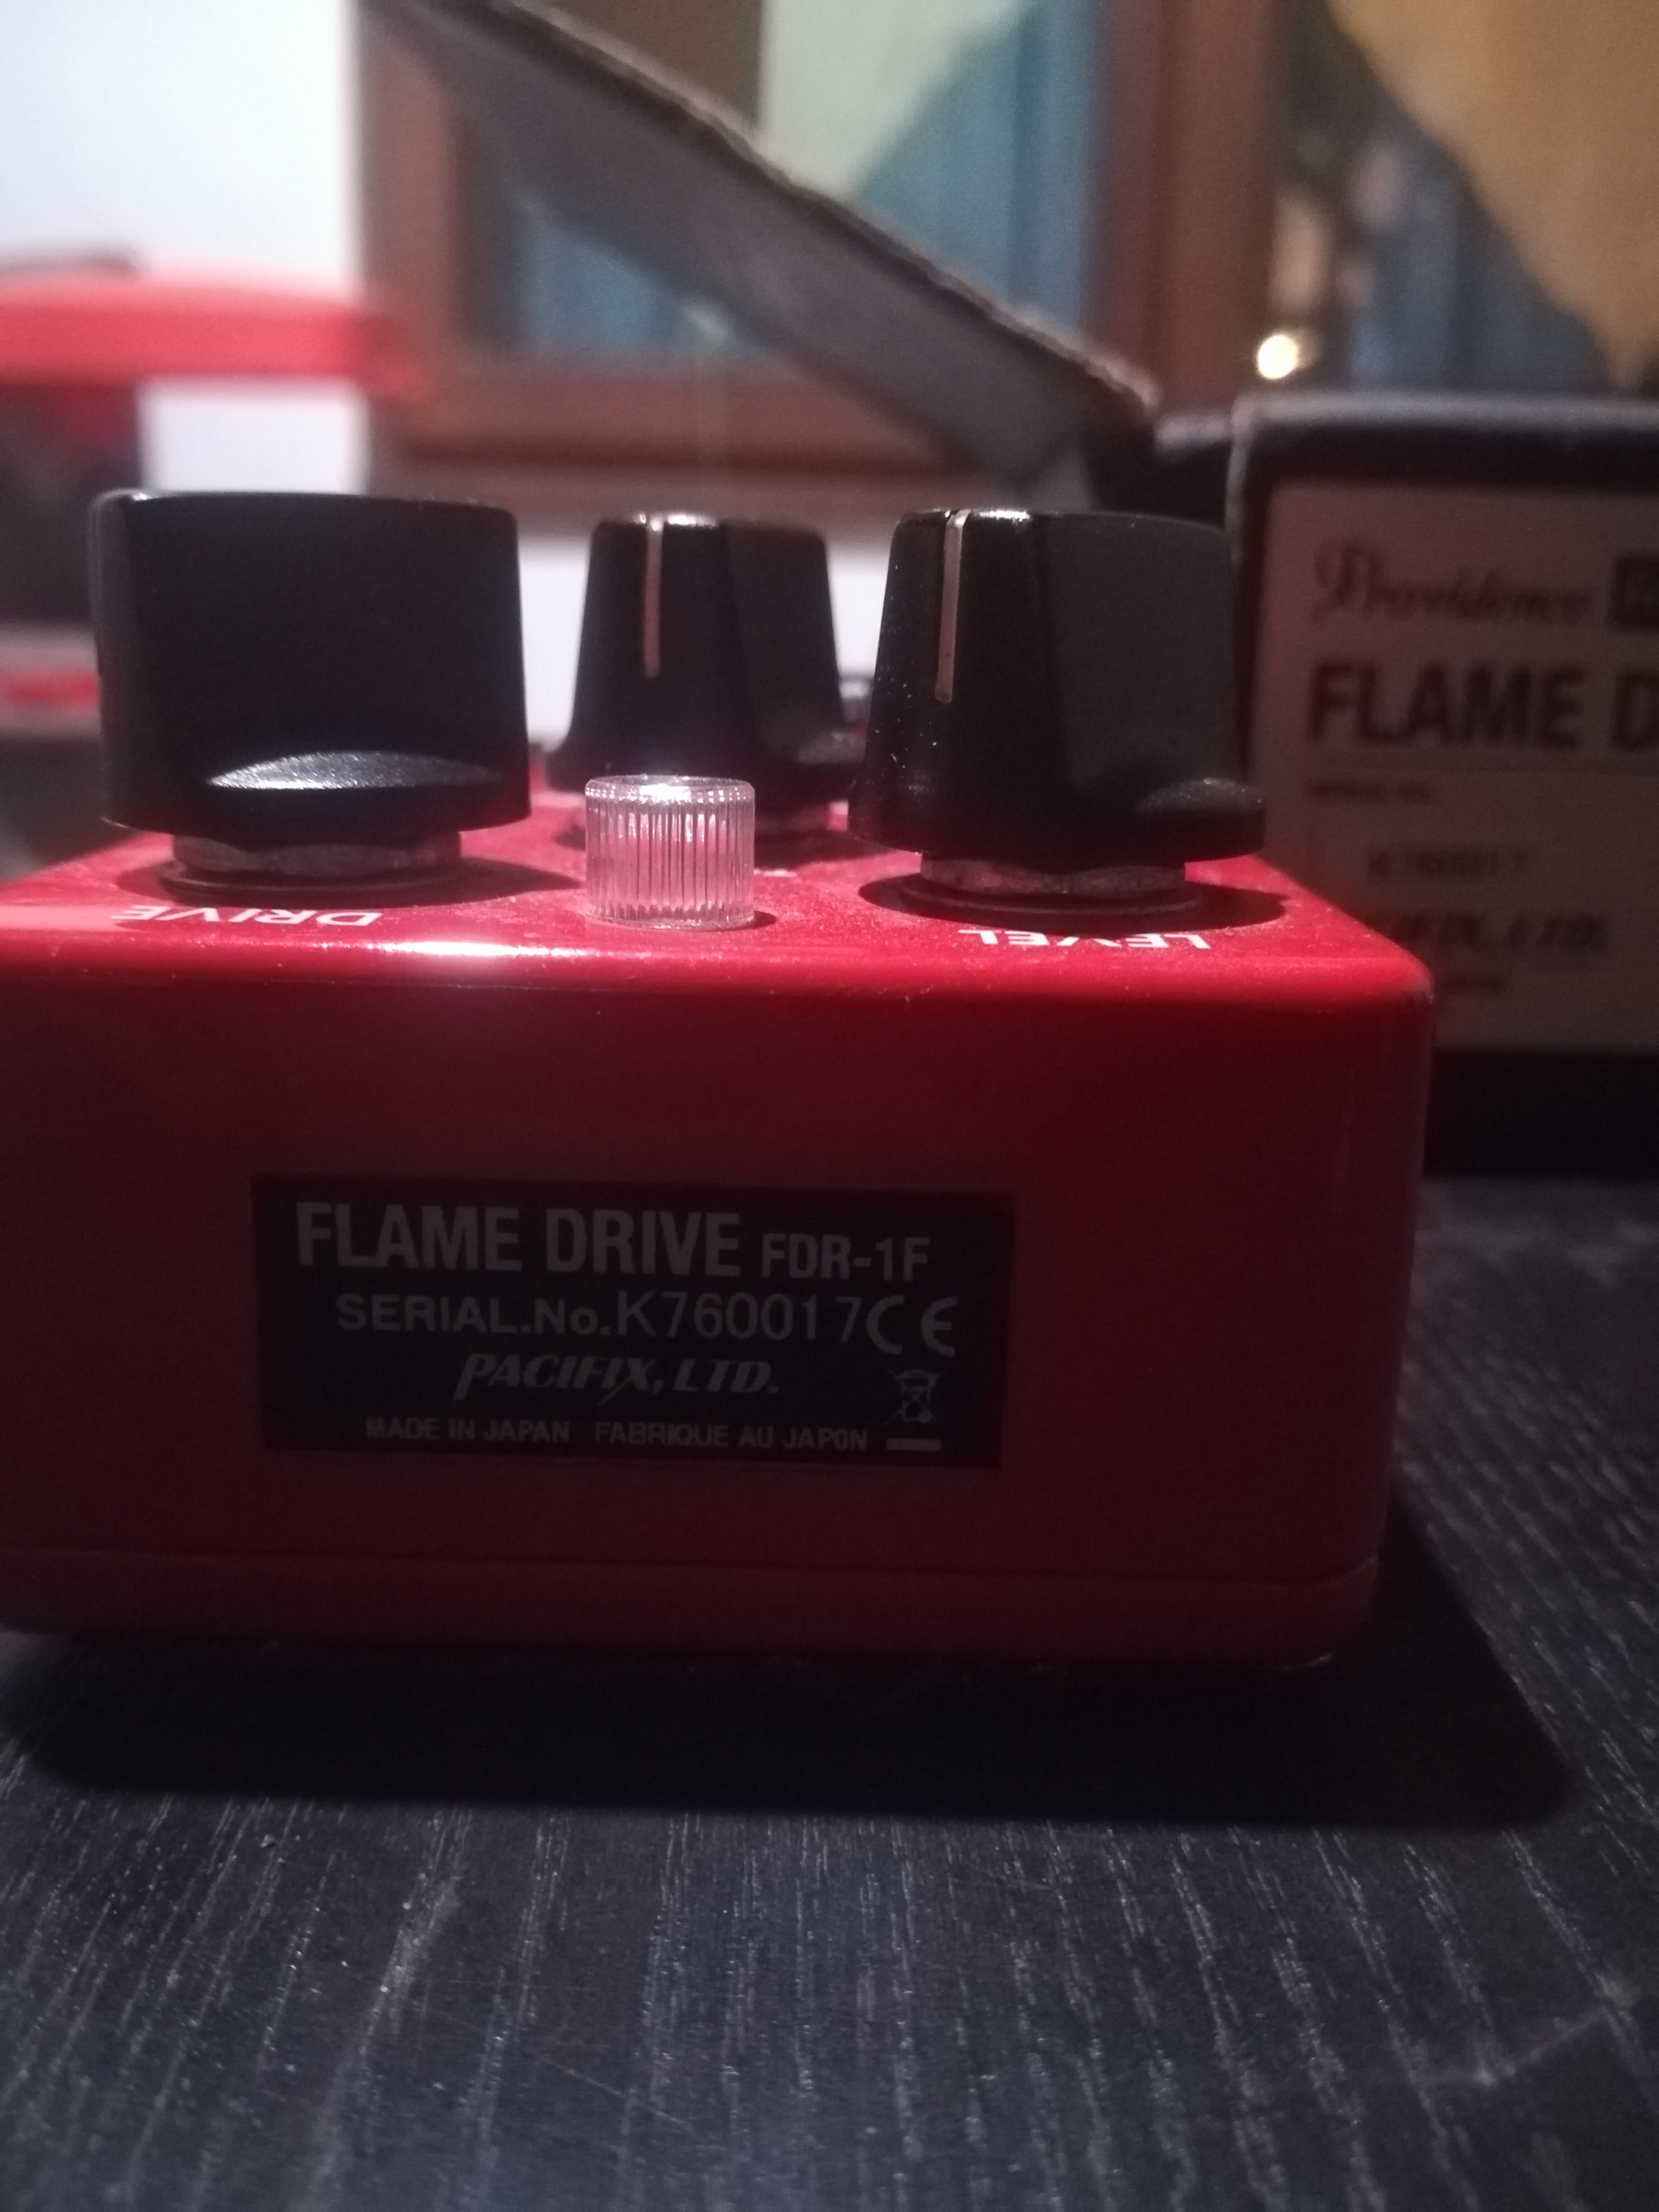 Flame Drive FDR-1F - Providence Flame Drive FDR-1F - Audiofanzine